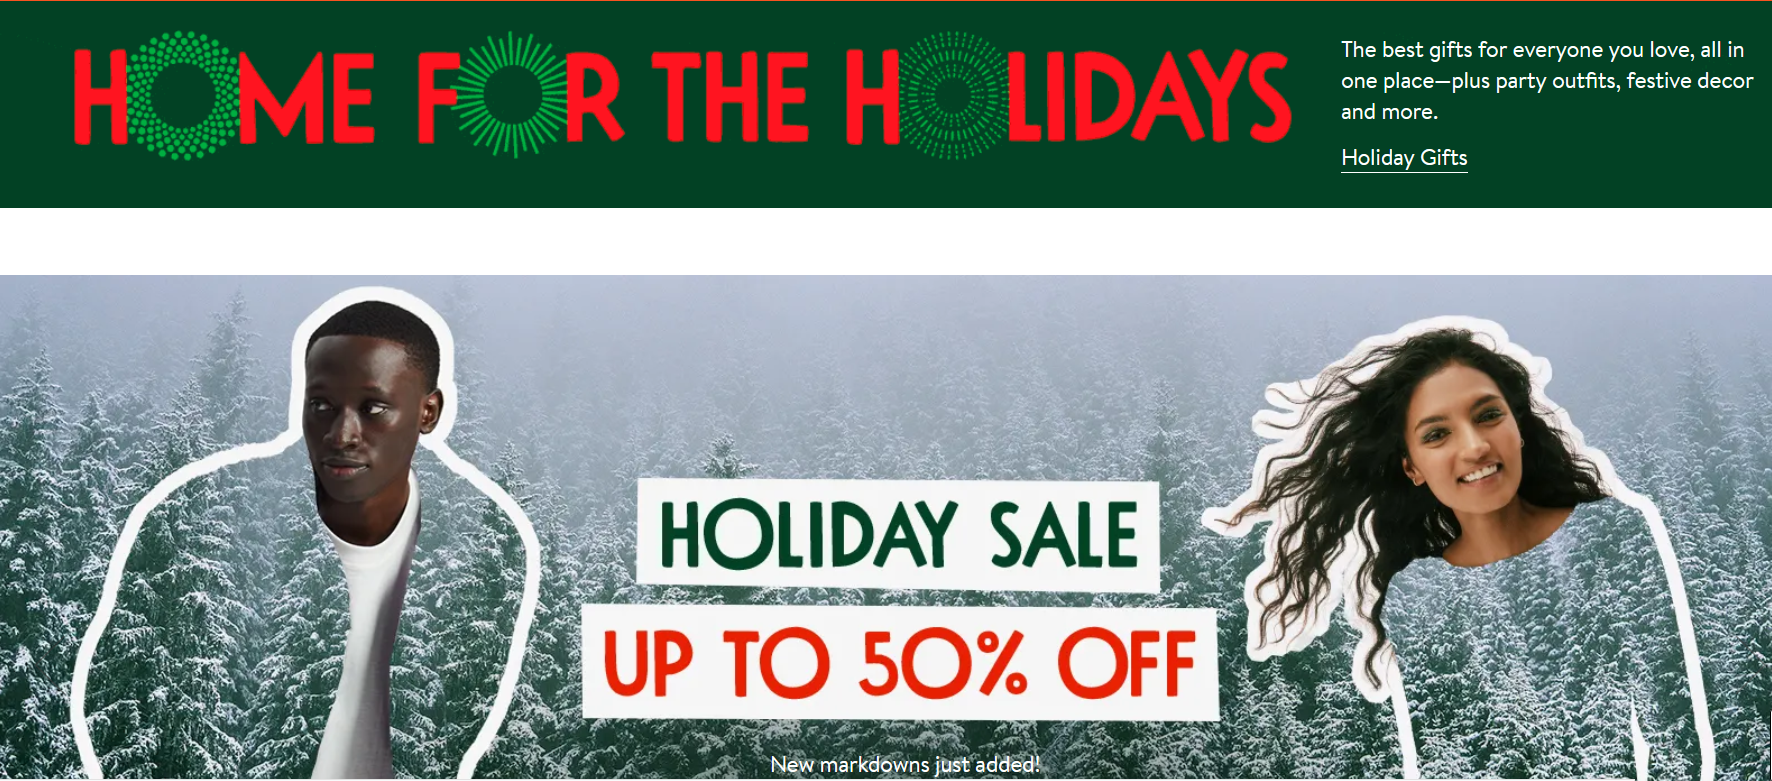 Screenshot showing the holiday design on Nordstrom’s homepage